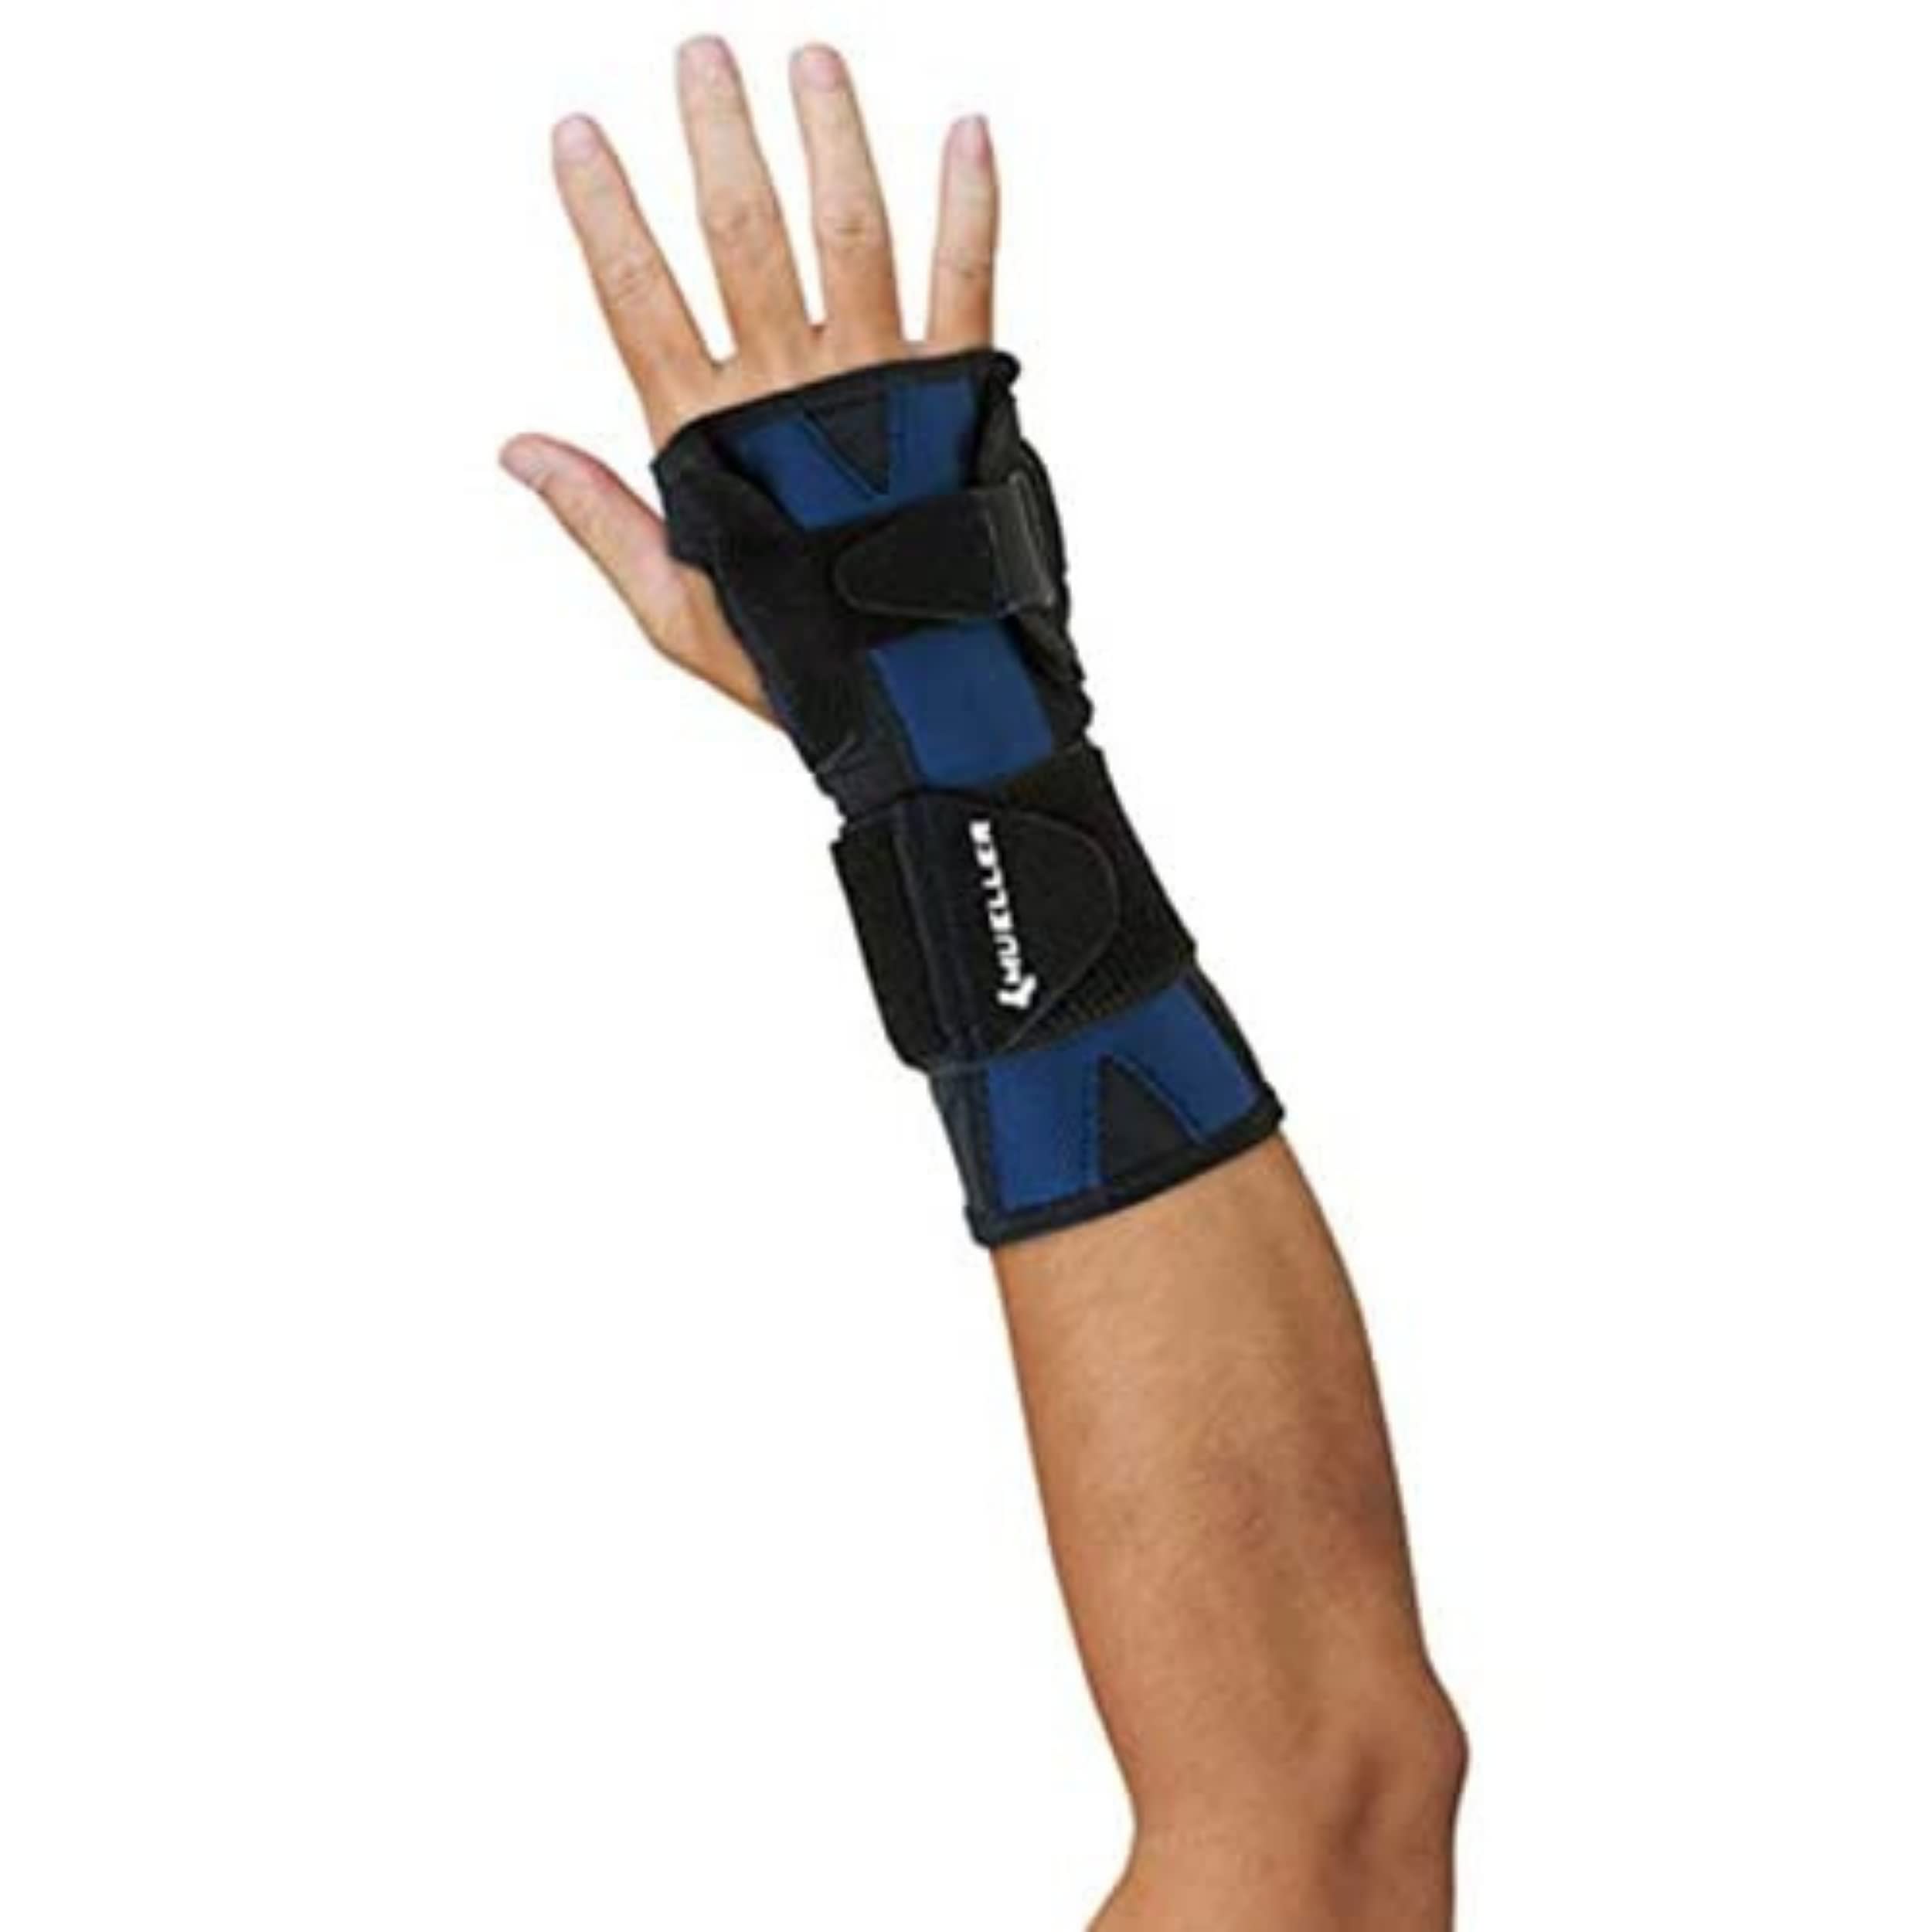 MUELLER X-Stay Wrist Stabilizer, Black, Large/Extra Large (Pack of 1)